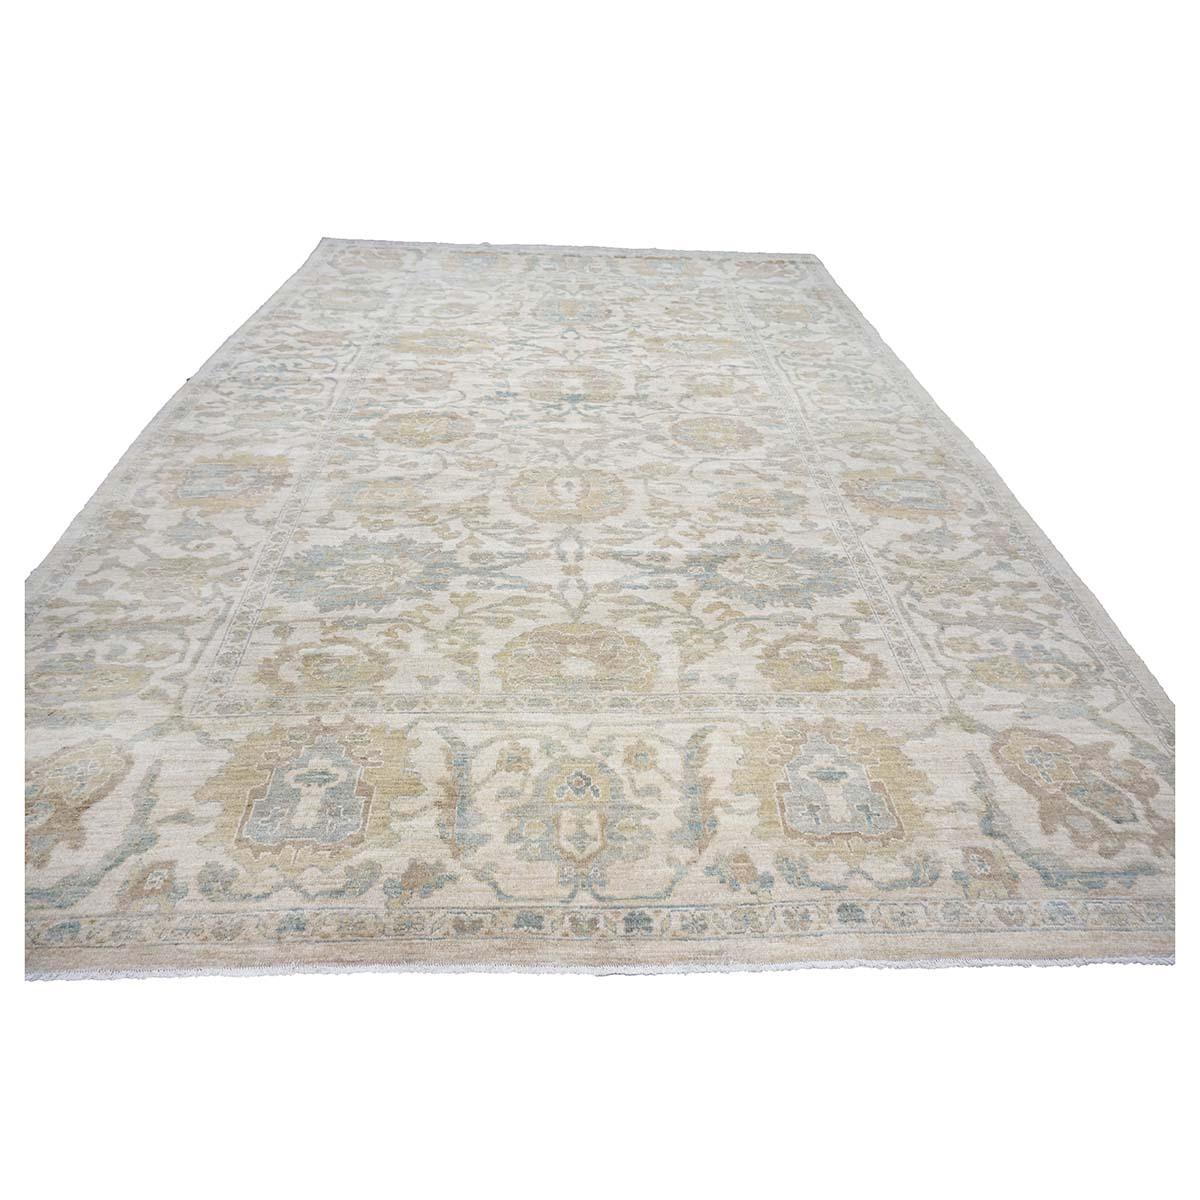 Ashly Fine rugs presents an antique recreation of an original Persian Sultanabad 10x14 Ivory Handmade Area Rug. Part of our own previous production, this antique recreation was thought of and created in-house and 100% handmade in Afghanistan by our